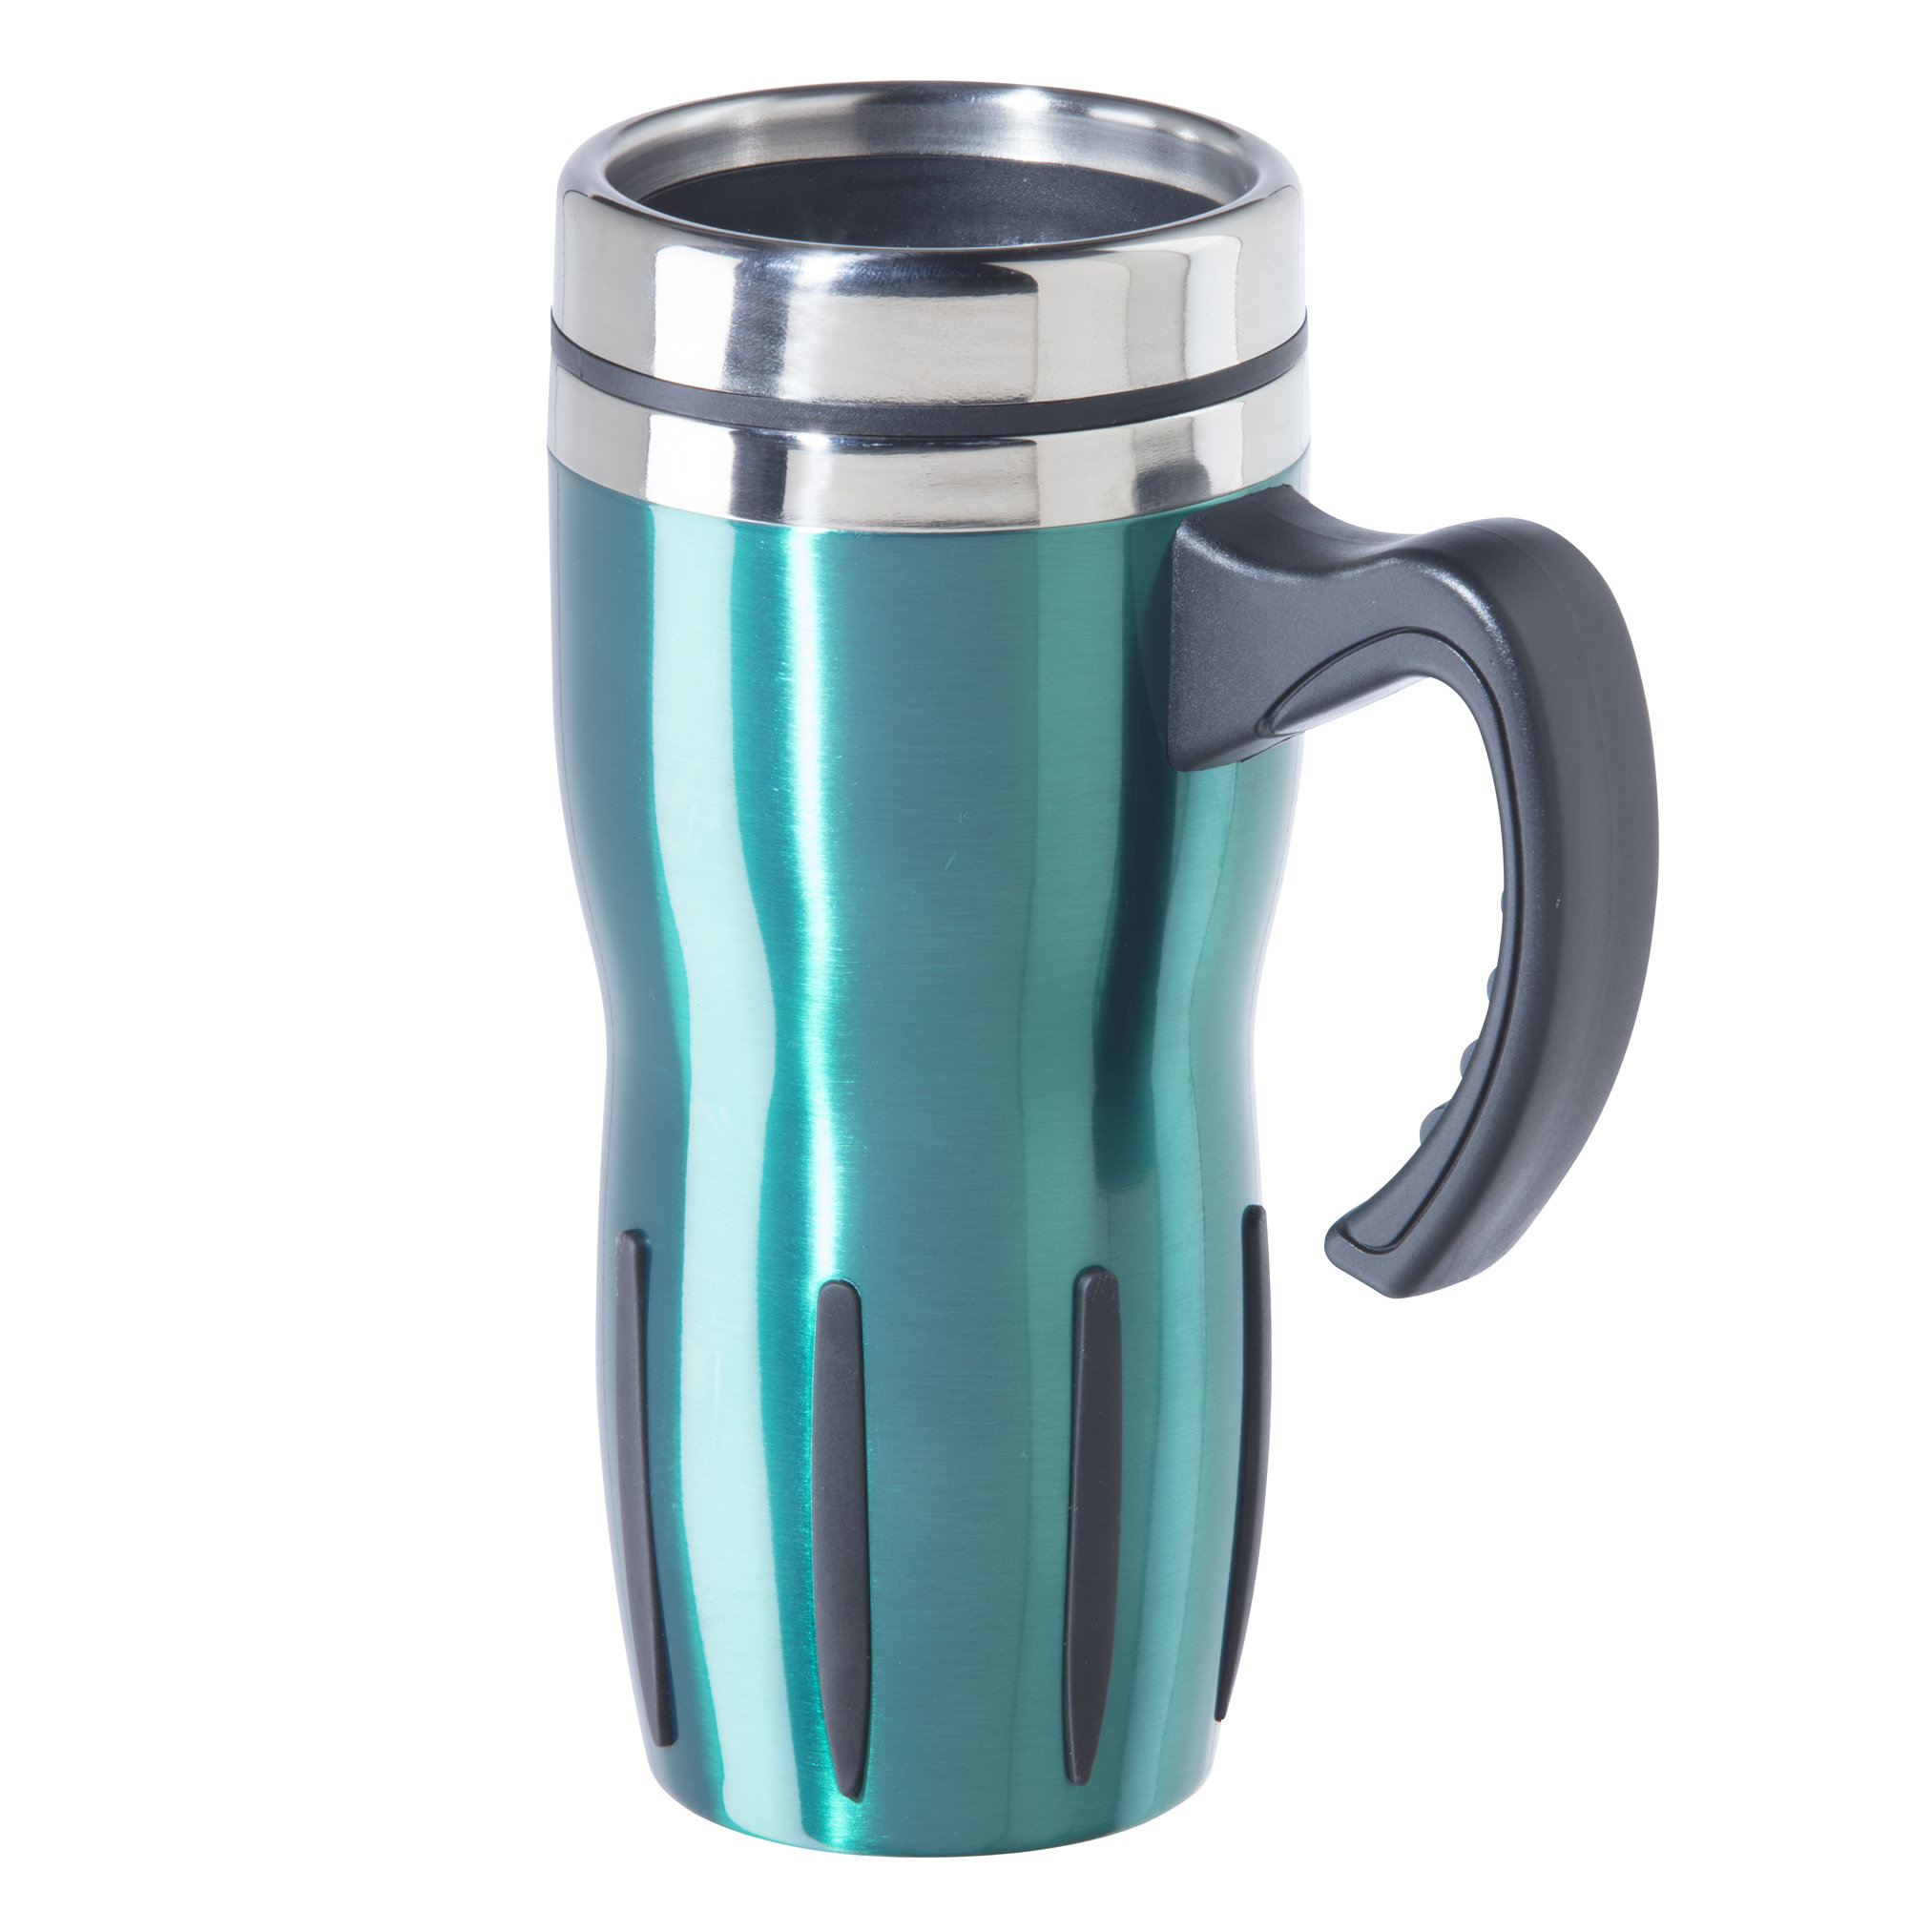 Oggi MultiGrip Stainless Steel Thermal Travel Mug - Peacock, 16oz, with Slide Open Lid for Hot and Cold Beverages.